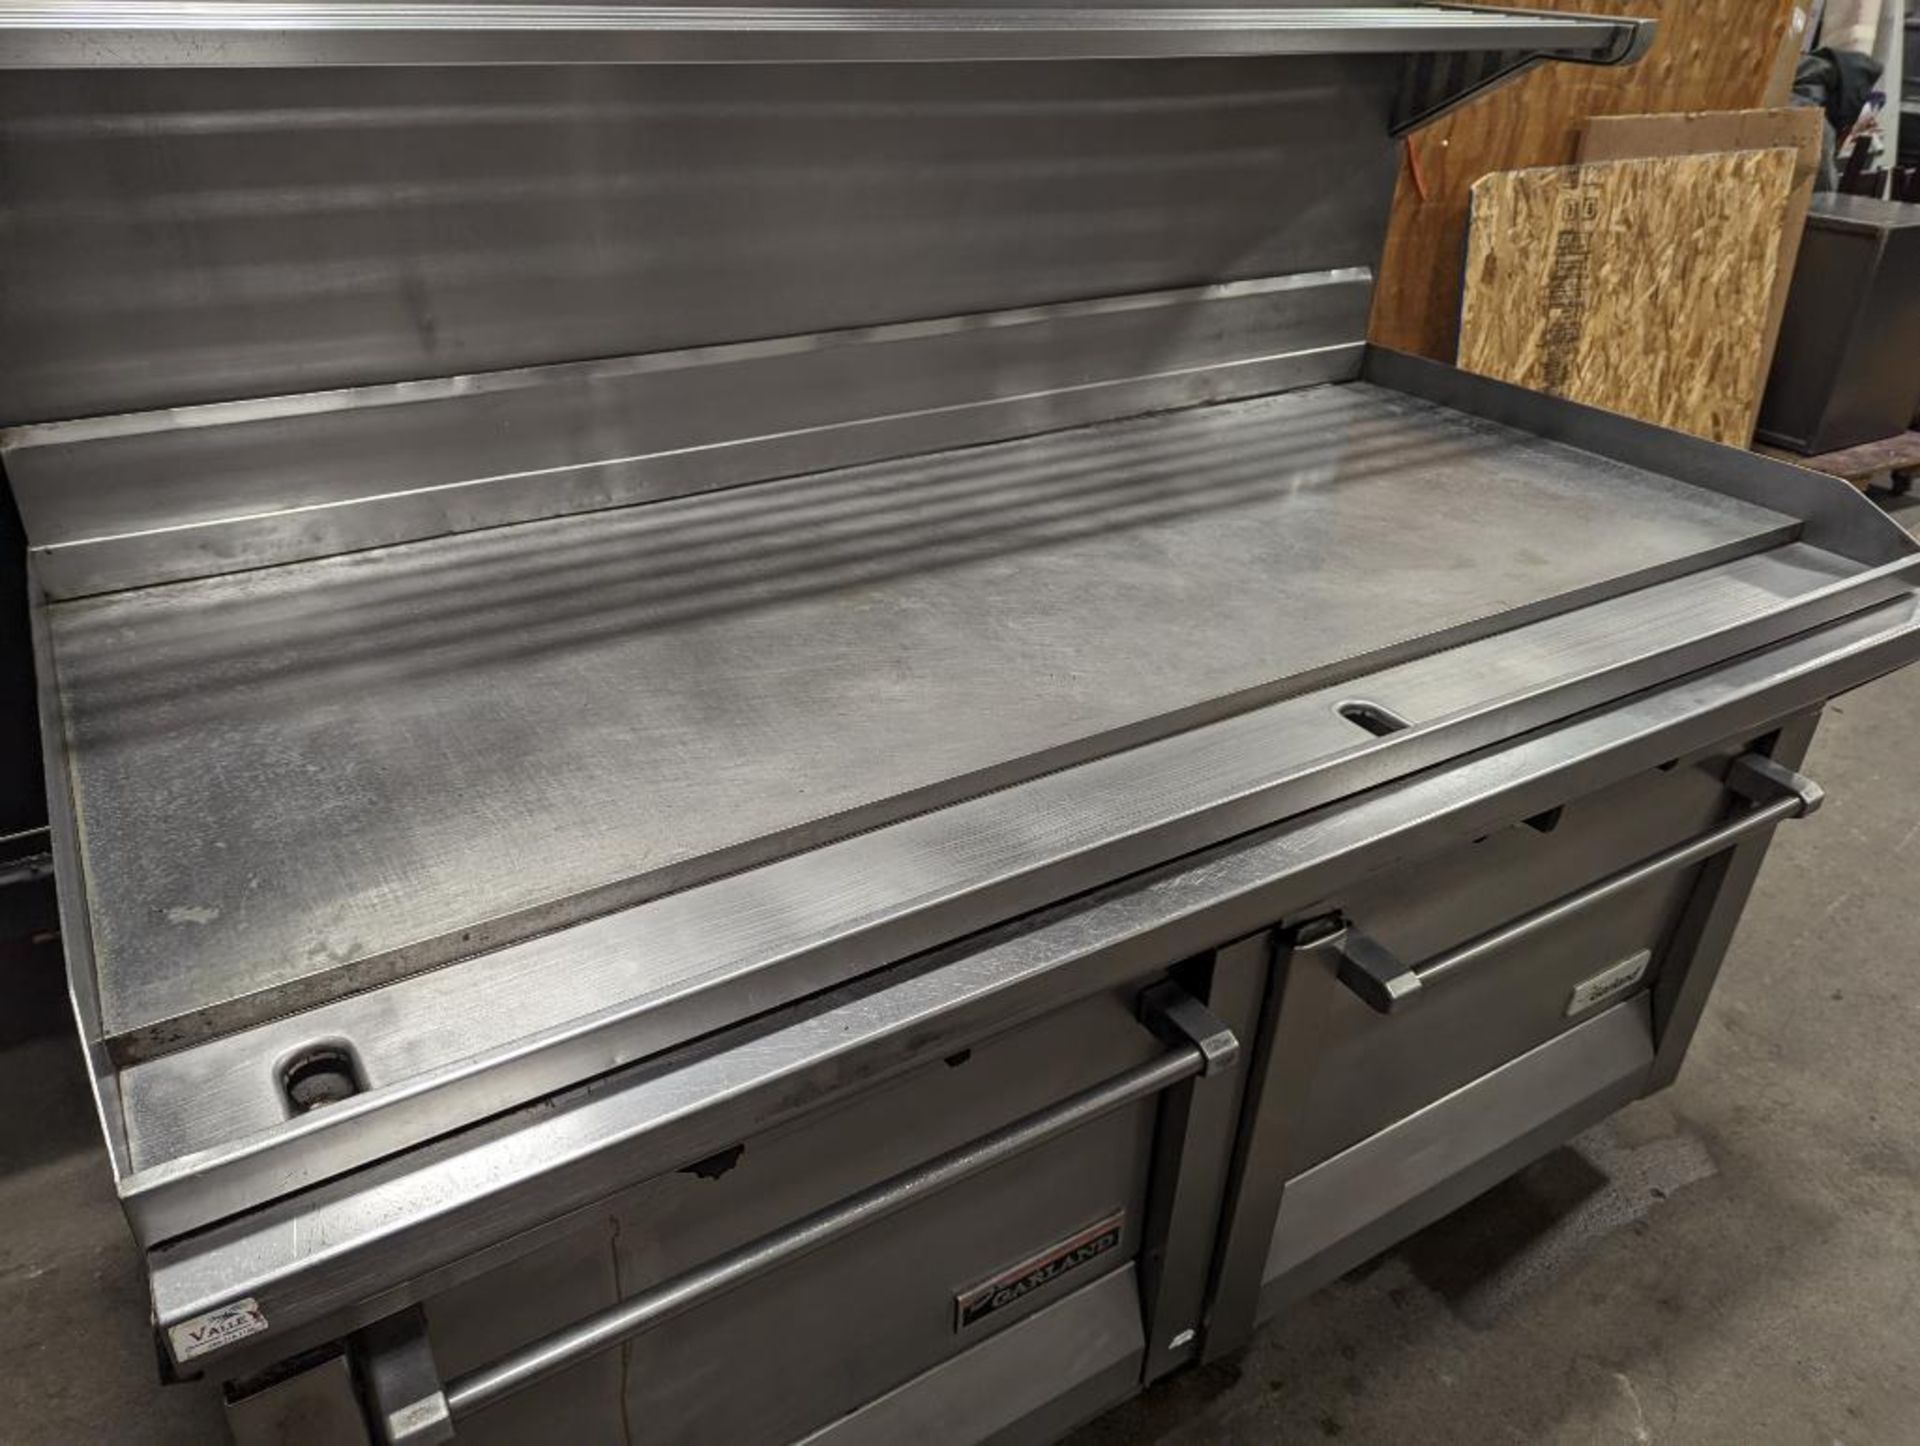 GARLAND M48-68R 68" GRIDDLE WITH DOUBLE STANDARD OVEN - Image 5 of 14